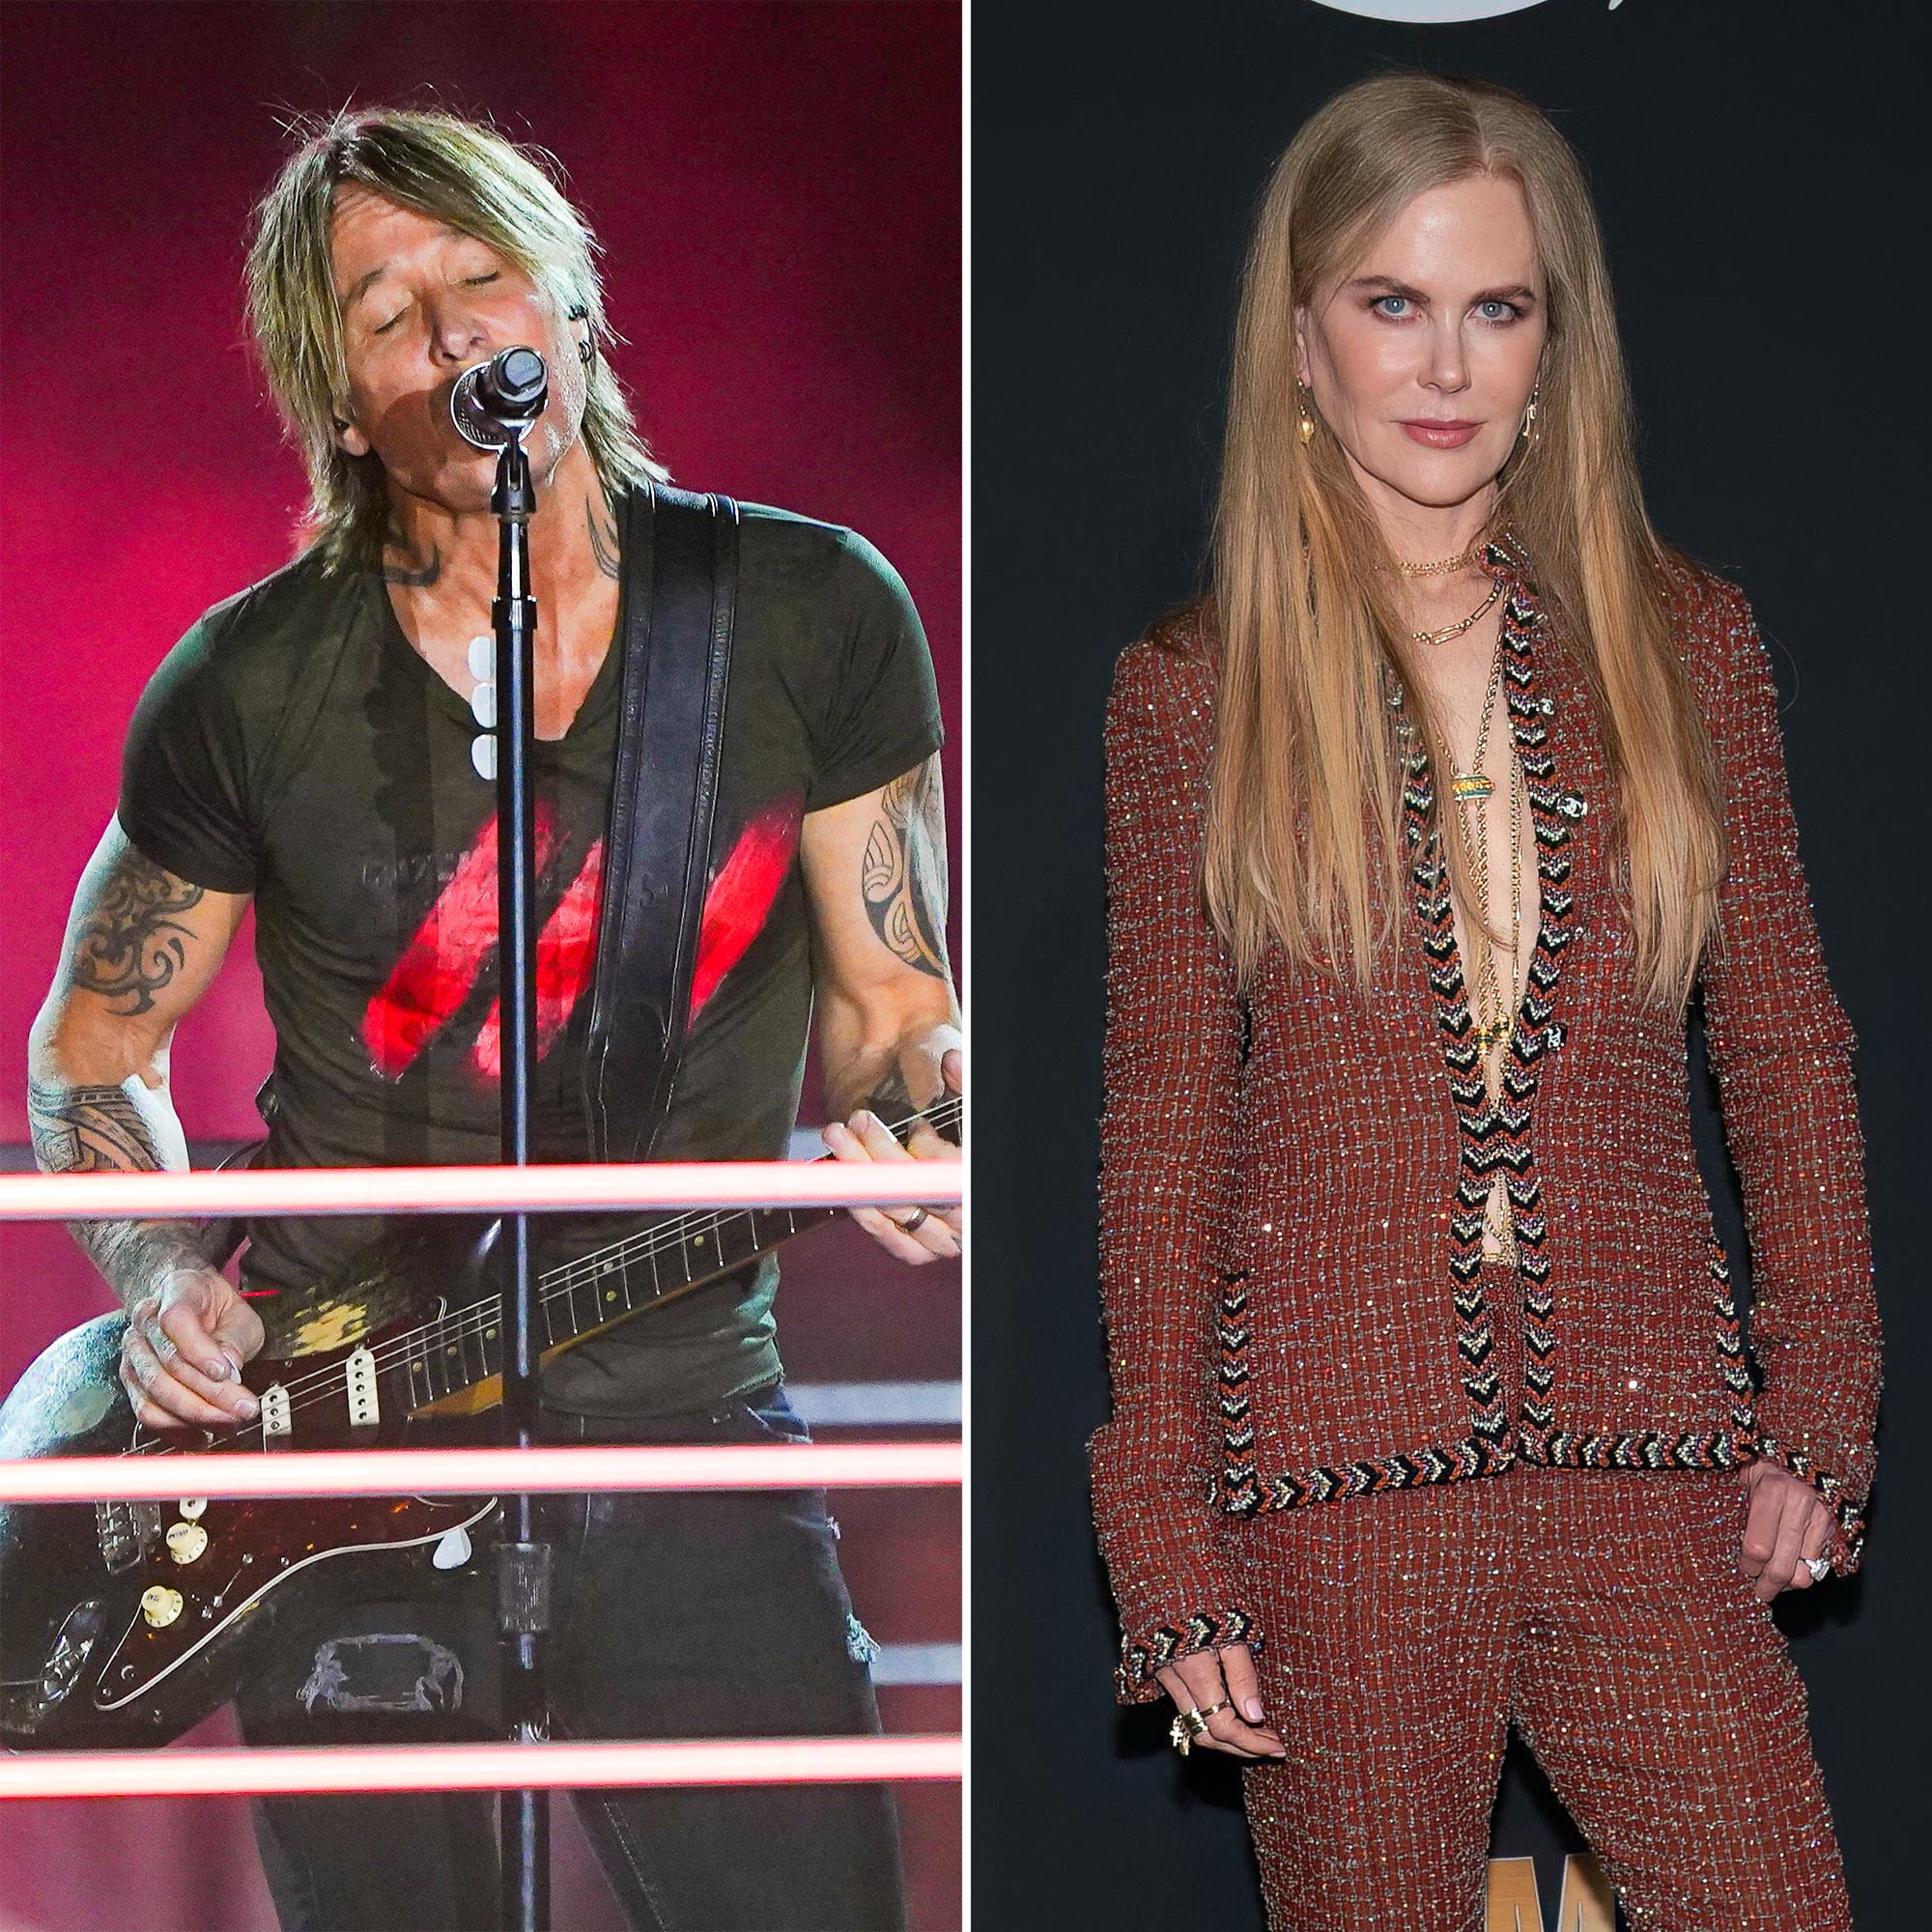 Keith Urban Says He Still Tries to ‘Impress’ Wife Nicole Kidman When She Attends His Concerts